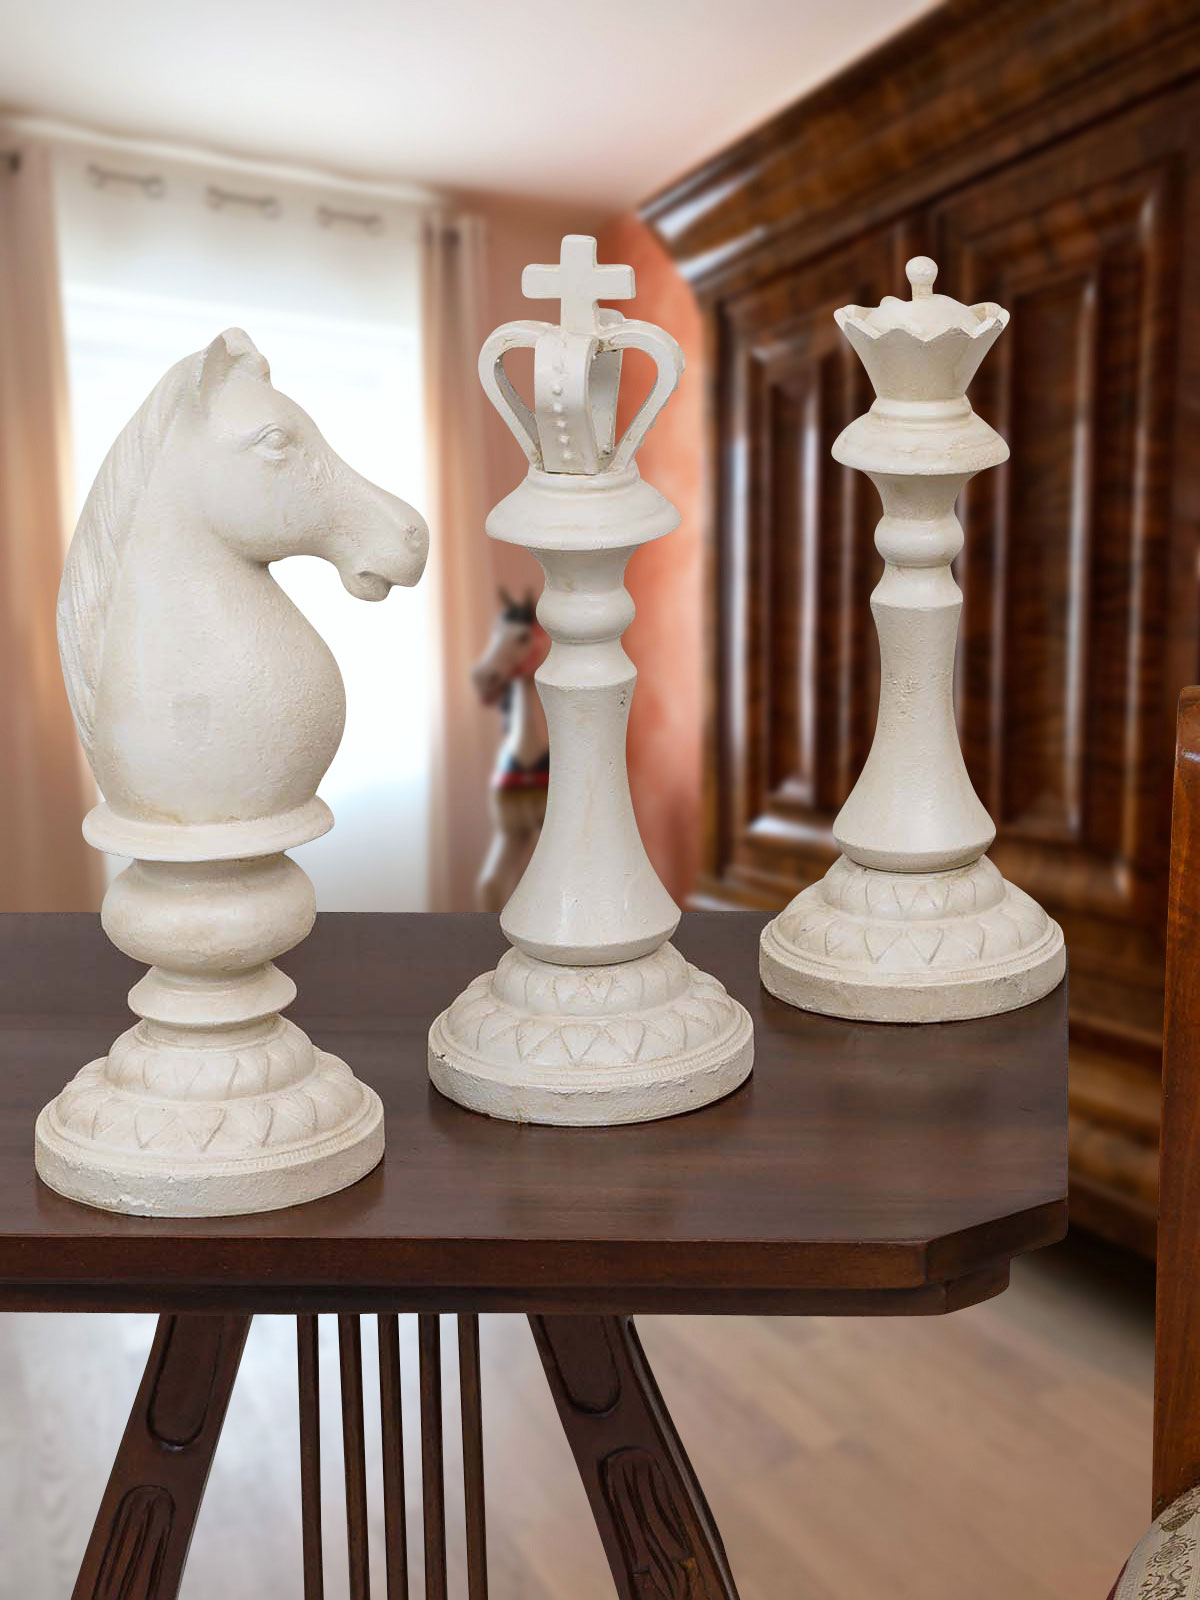 34cm white aubaho Chess pieces horse queen king iron chess figures antique style